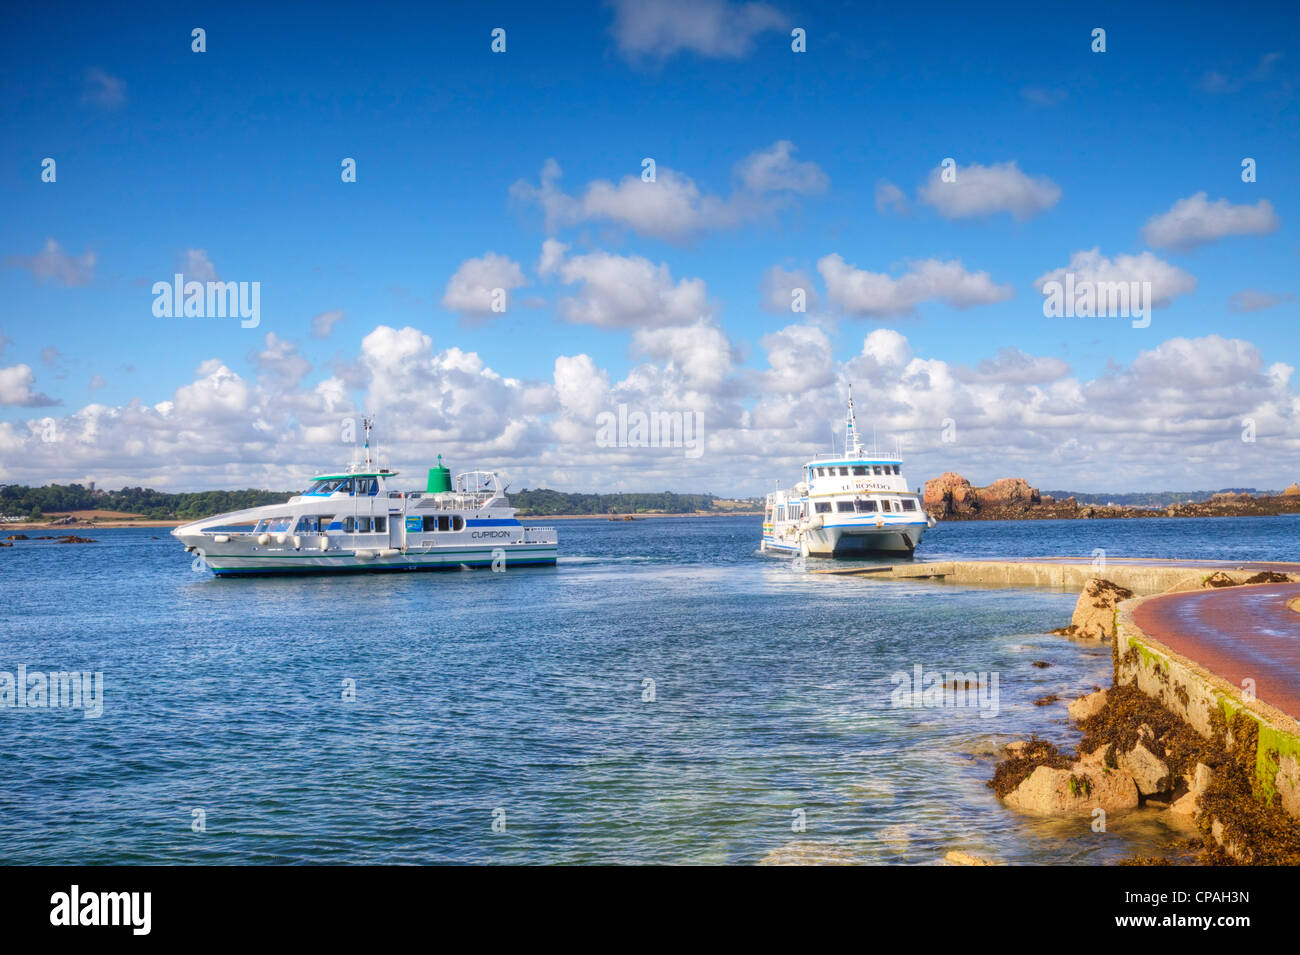 Ferry and tourist boat manoeuvering at the low tide jetty of the main harbour on Ile de Brehat, Brittany, France. Stock Photo